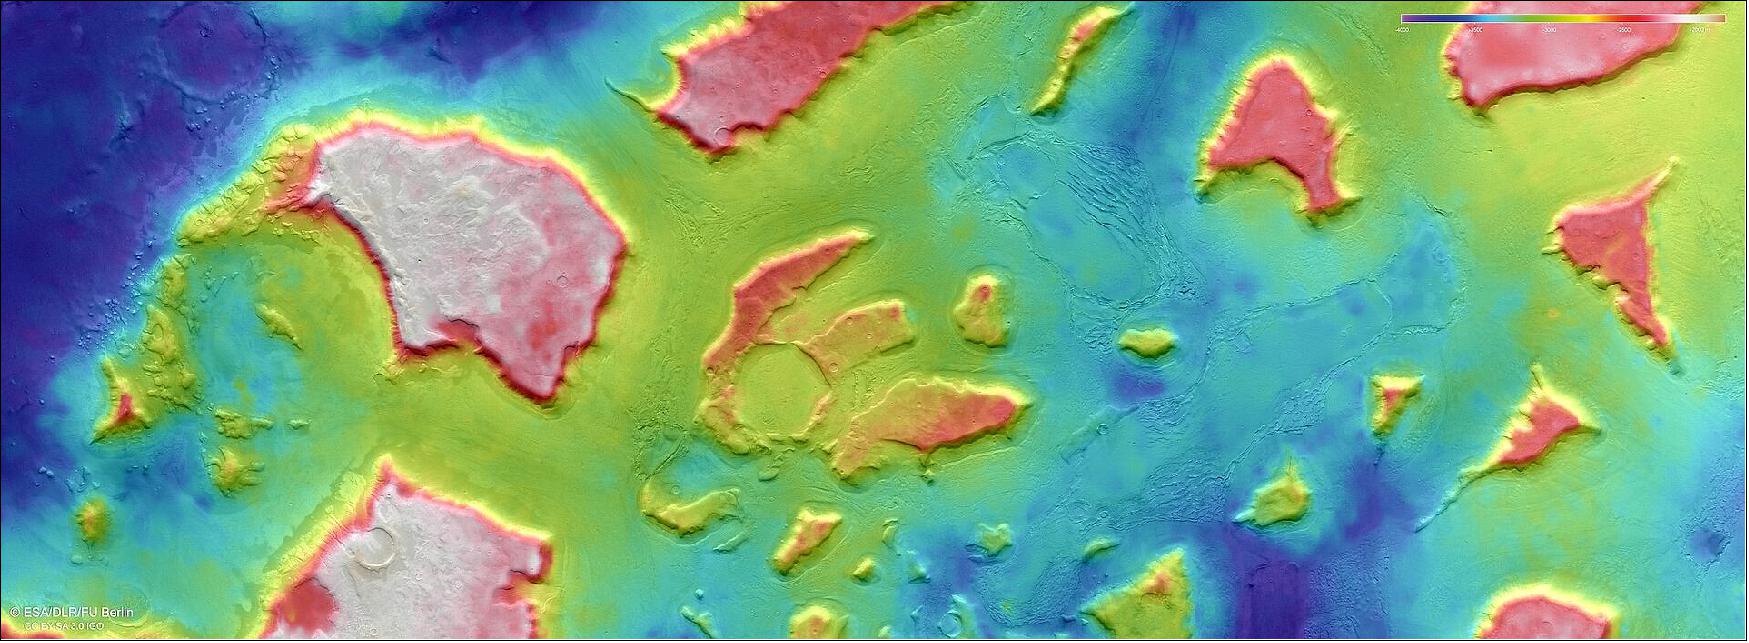 Figure 5: This color-coded topographic view shows a region of Mars named Deuteronilus Mensae. Lower parts of the surface are shown in blues and purples, while higher altitude regions show up in whites, yellows and reds, as indicated on the scale to the top right. This view is based on a digital terrain model of the region, from which the topography of the landscape can be derived. It comprises data gathered on 25 February 2018 during orbit 17913. The ground resolution is approximately 13 m/pixel and the images are centered at about 25.5ºE/44ºN. North is to the right (image credit: ESA/DLR/FU Berlin, CC BY-SA 3.0 IGO)